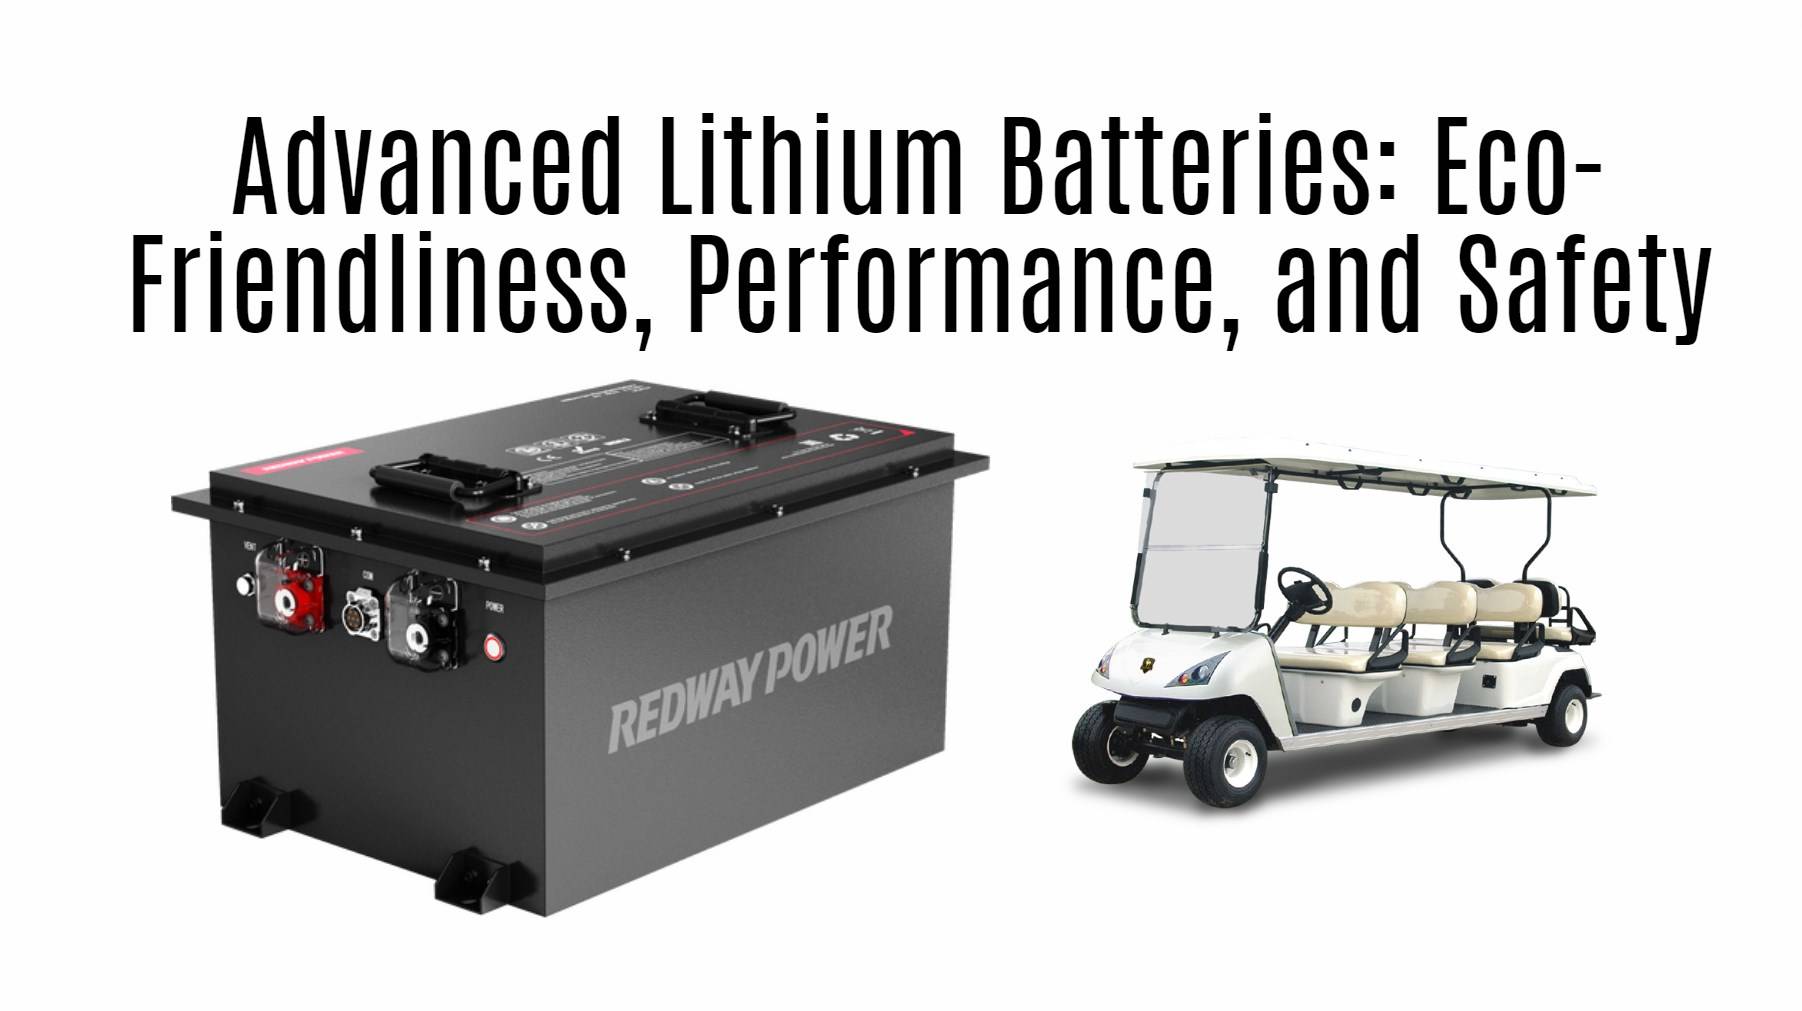 Advanced Lithium Batteries: Eco-Friendliness, Performance, and Safety. 48v 100ah golf cart lithium battery factory manufacturer